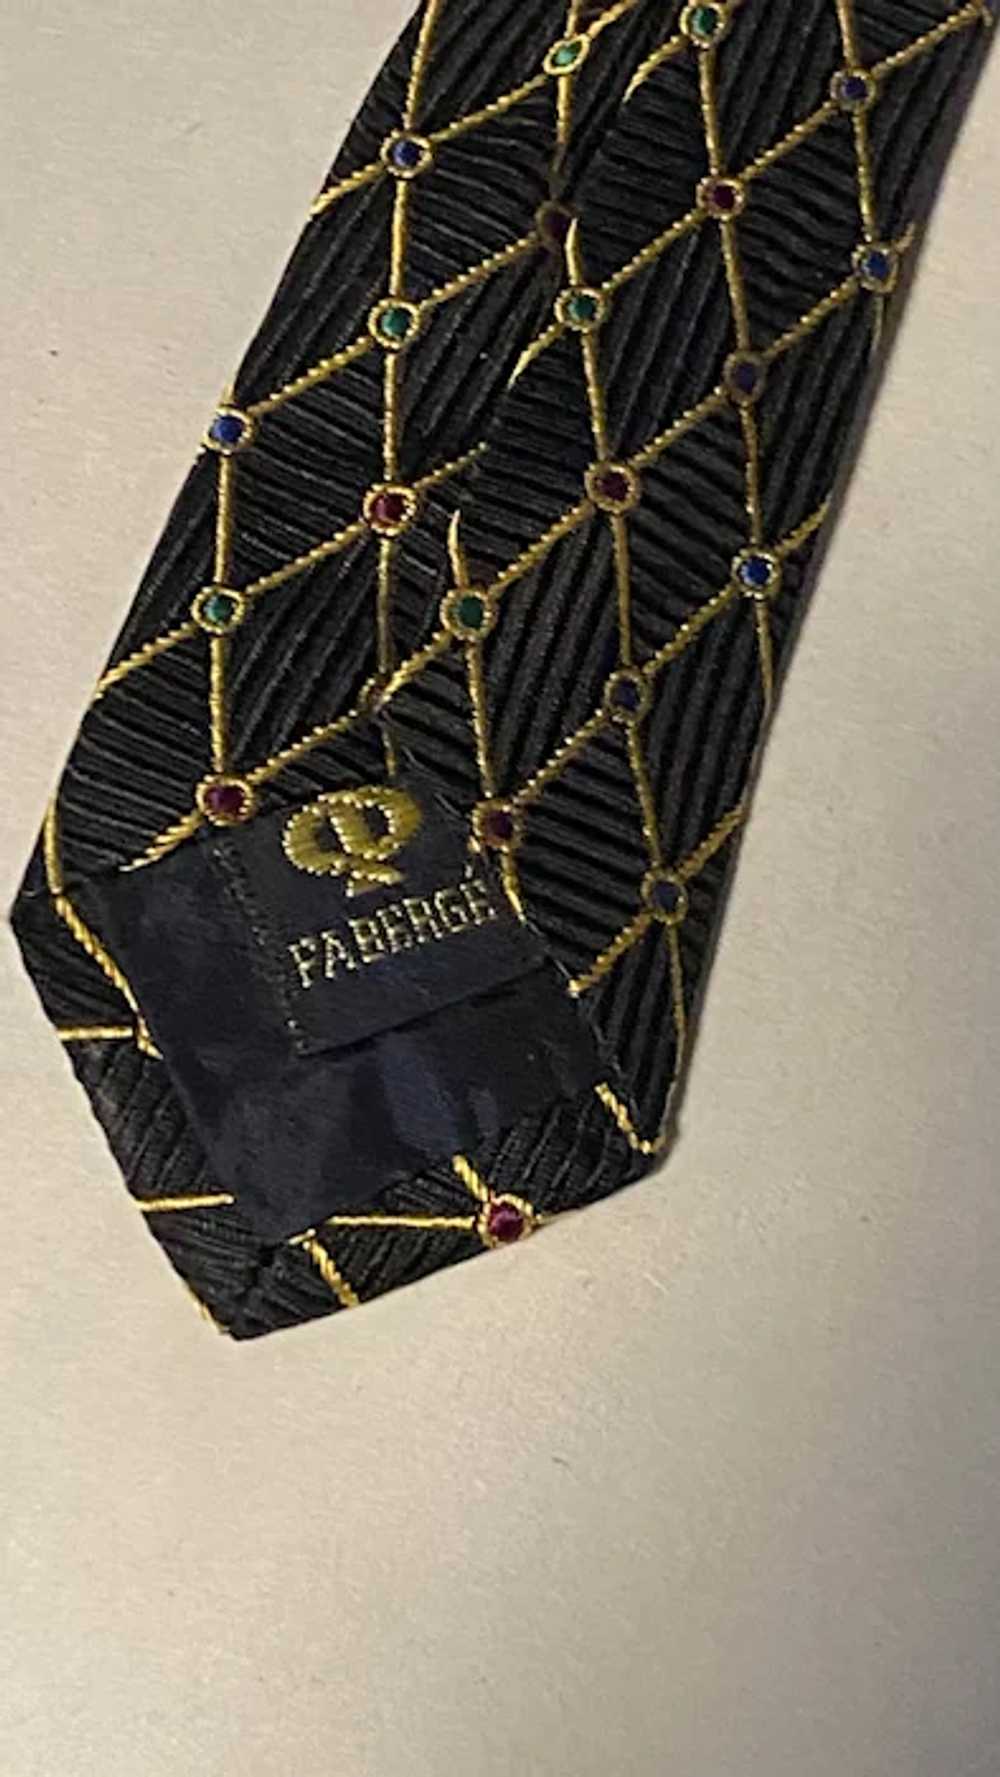 Faberge Tie black with blue green purple red - image 5